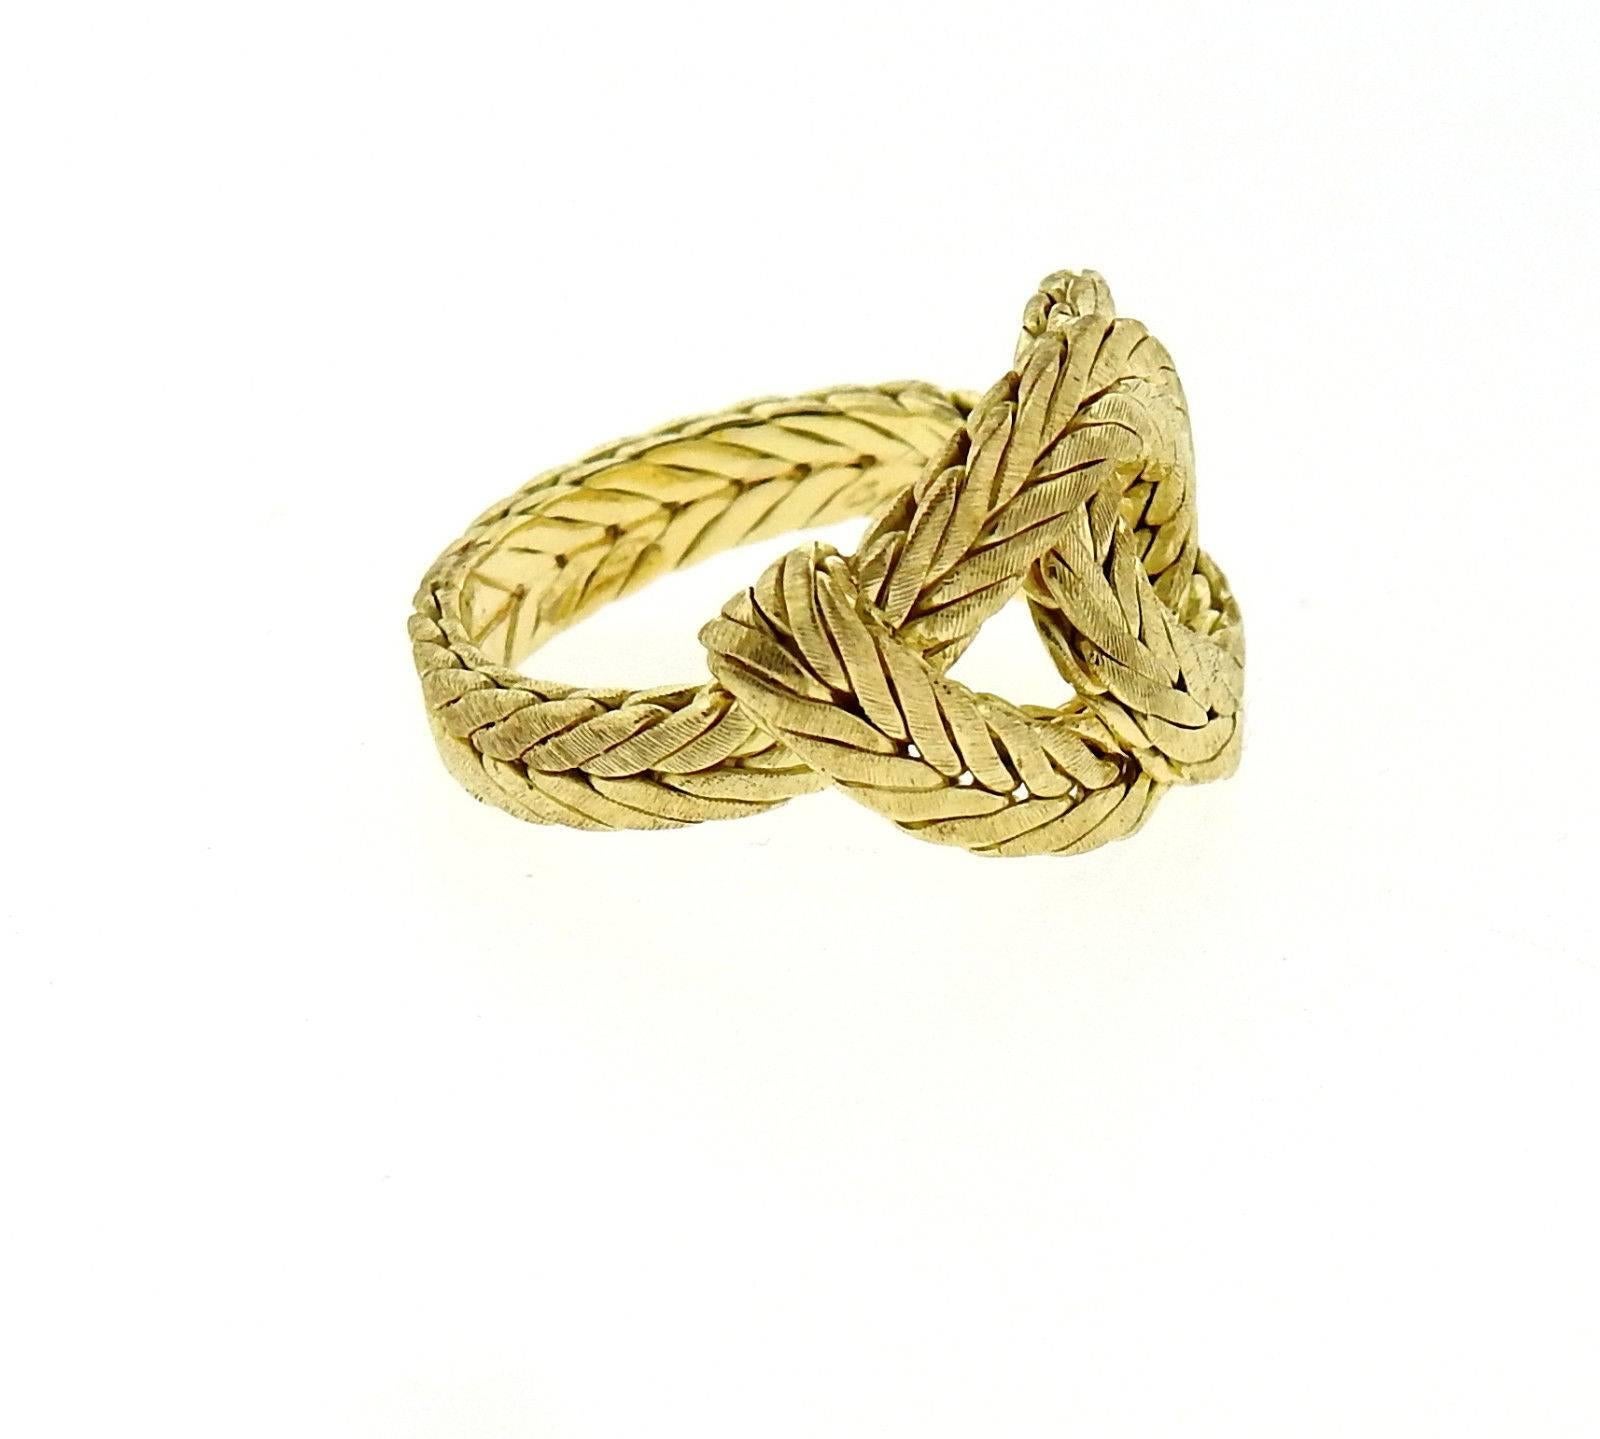 An 18k yellow gold knot ring by Buccellati.  The ring is a size 5 1/2, ring top is 13mm wide.  The weight of the piece is 7.7 grams.  Marked: 750, Italian mark, Italy, Buccellati.  Current retail is $3590.